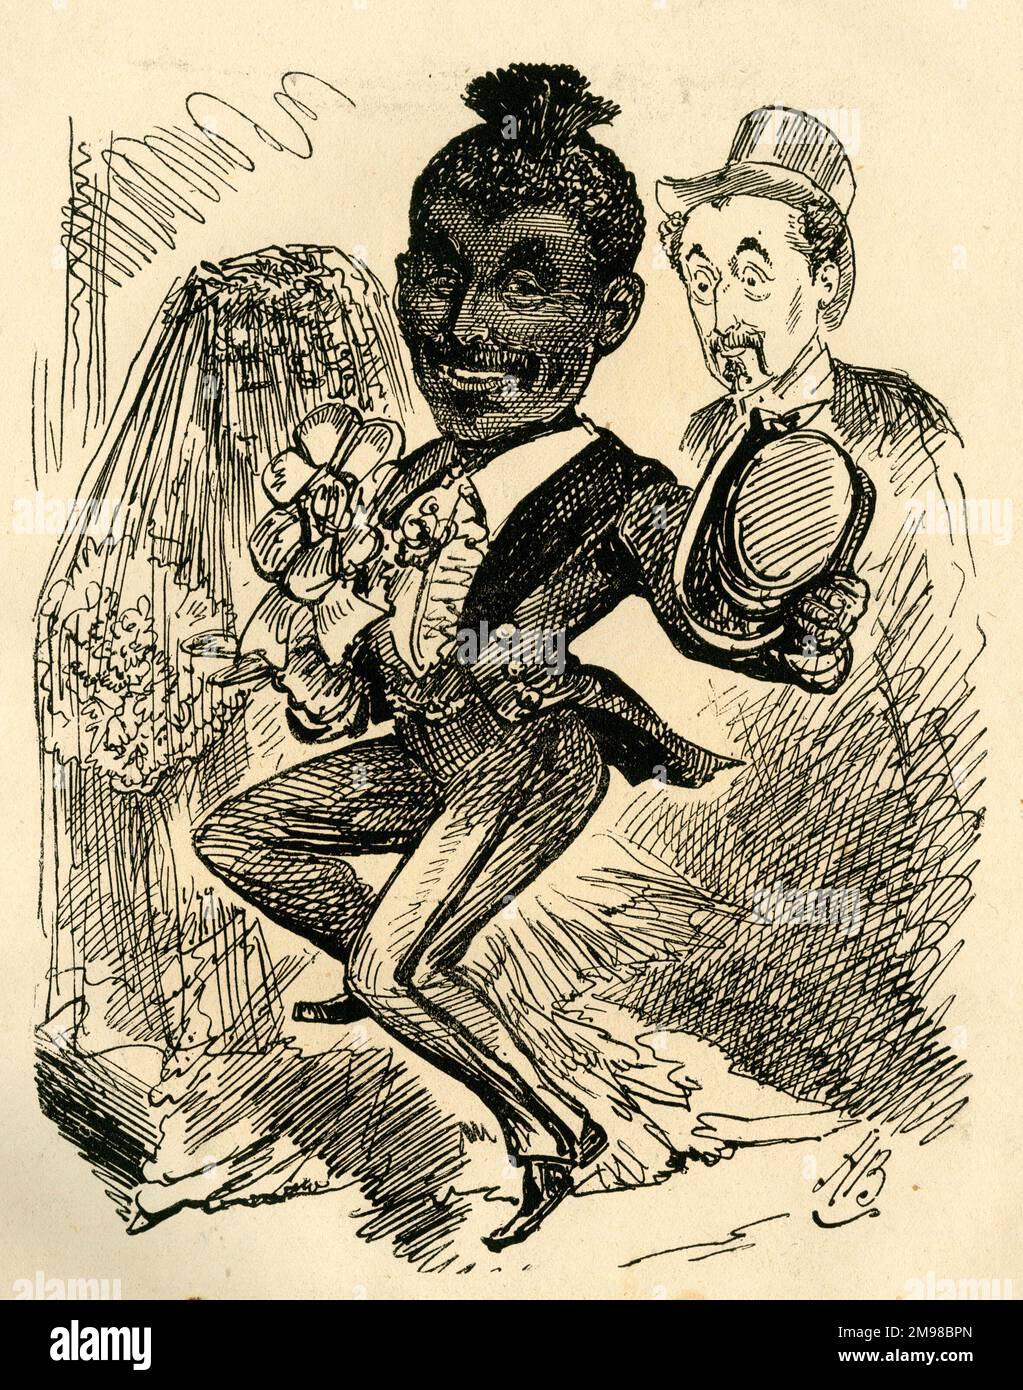 Cartoon, wedding of George Washington Moore (1820-1909), minstrel, married on 18 May at Harlem to Miss Louise Newman (American paper).  He says to his business partner, Frederick Burgess -- Following your lead, Fred! Stock Photo